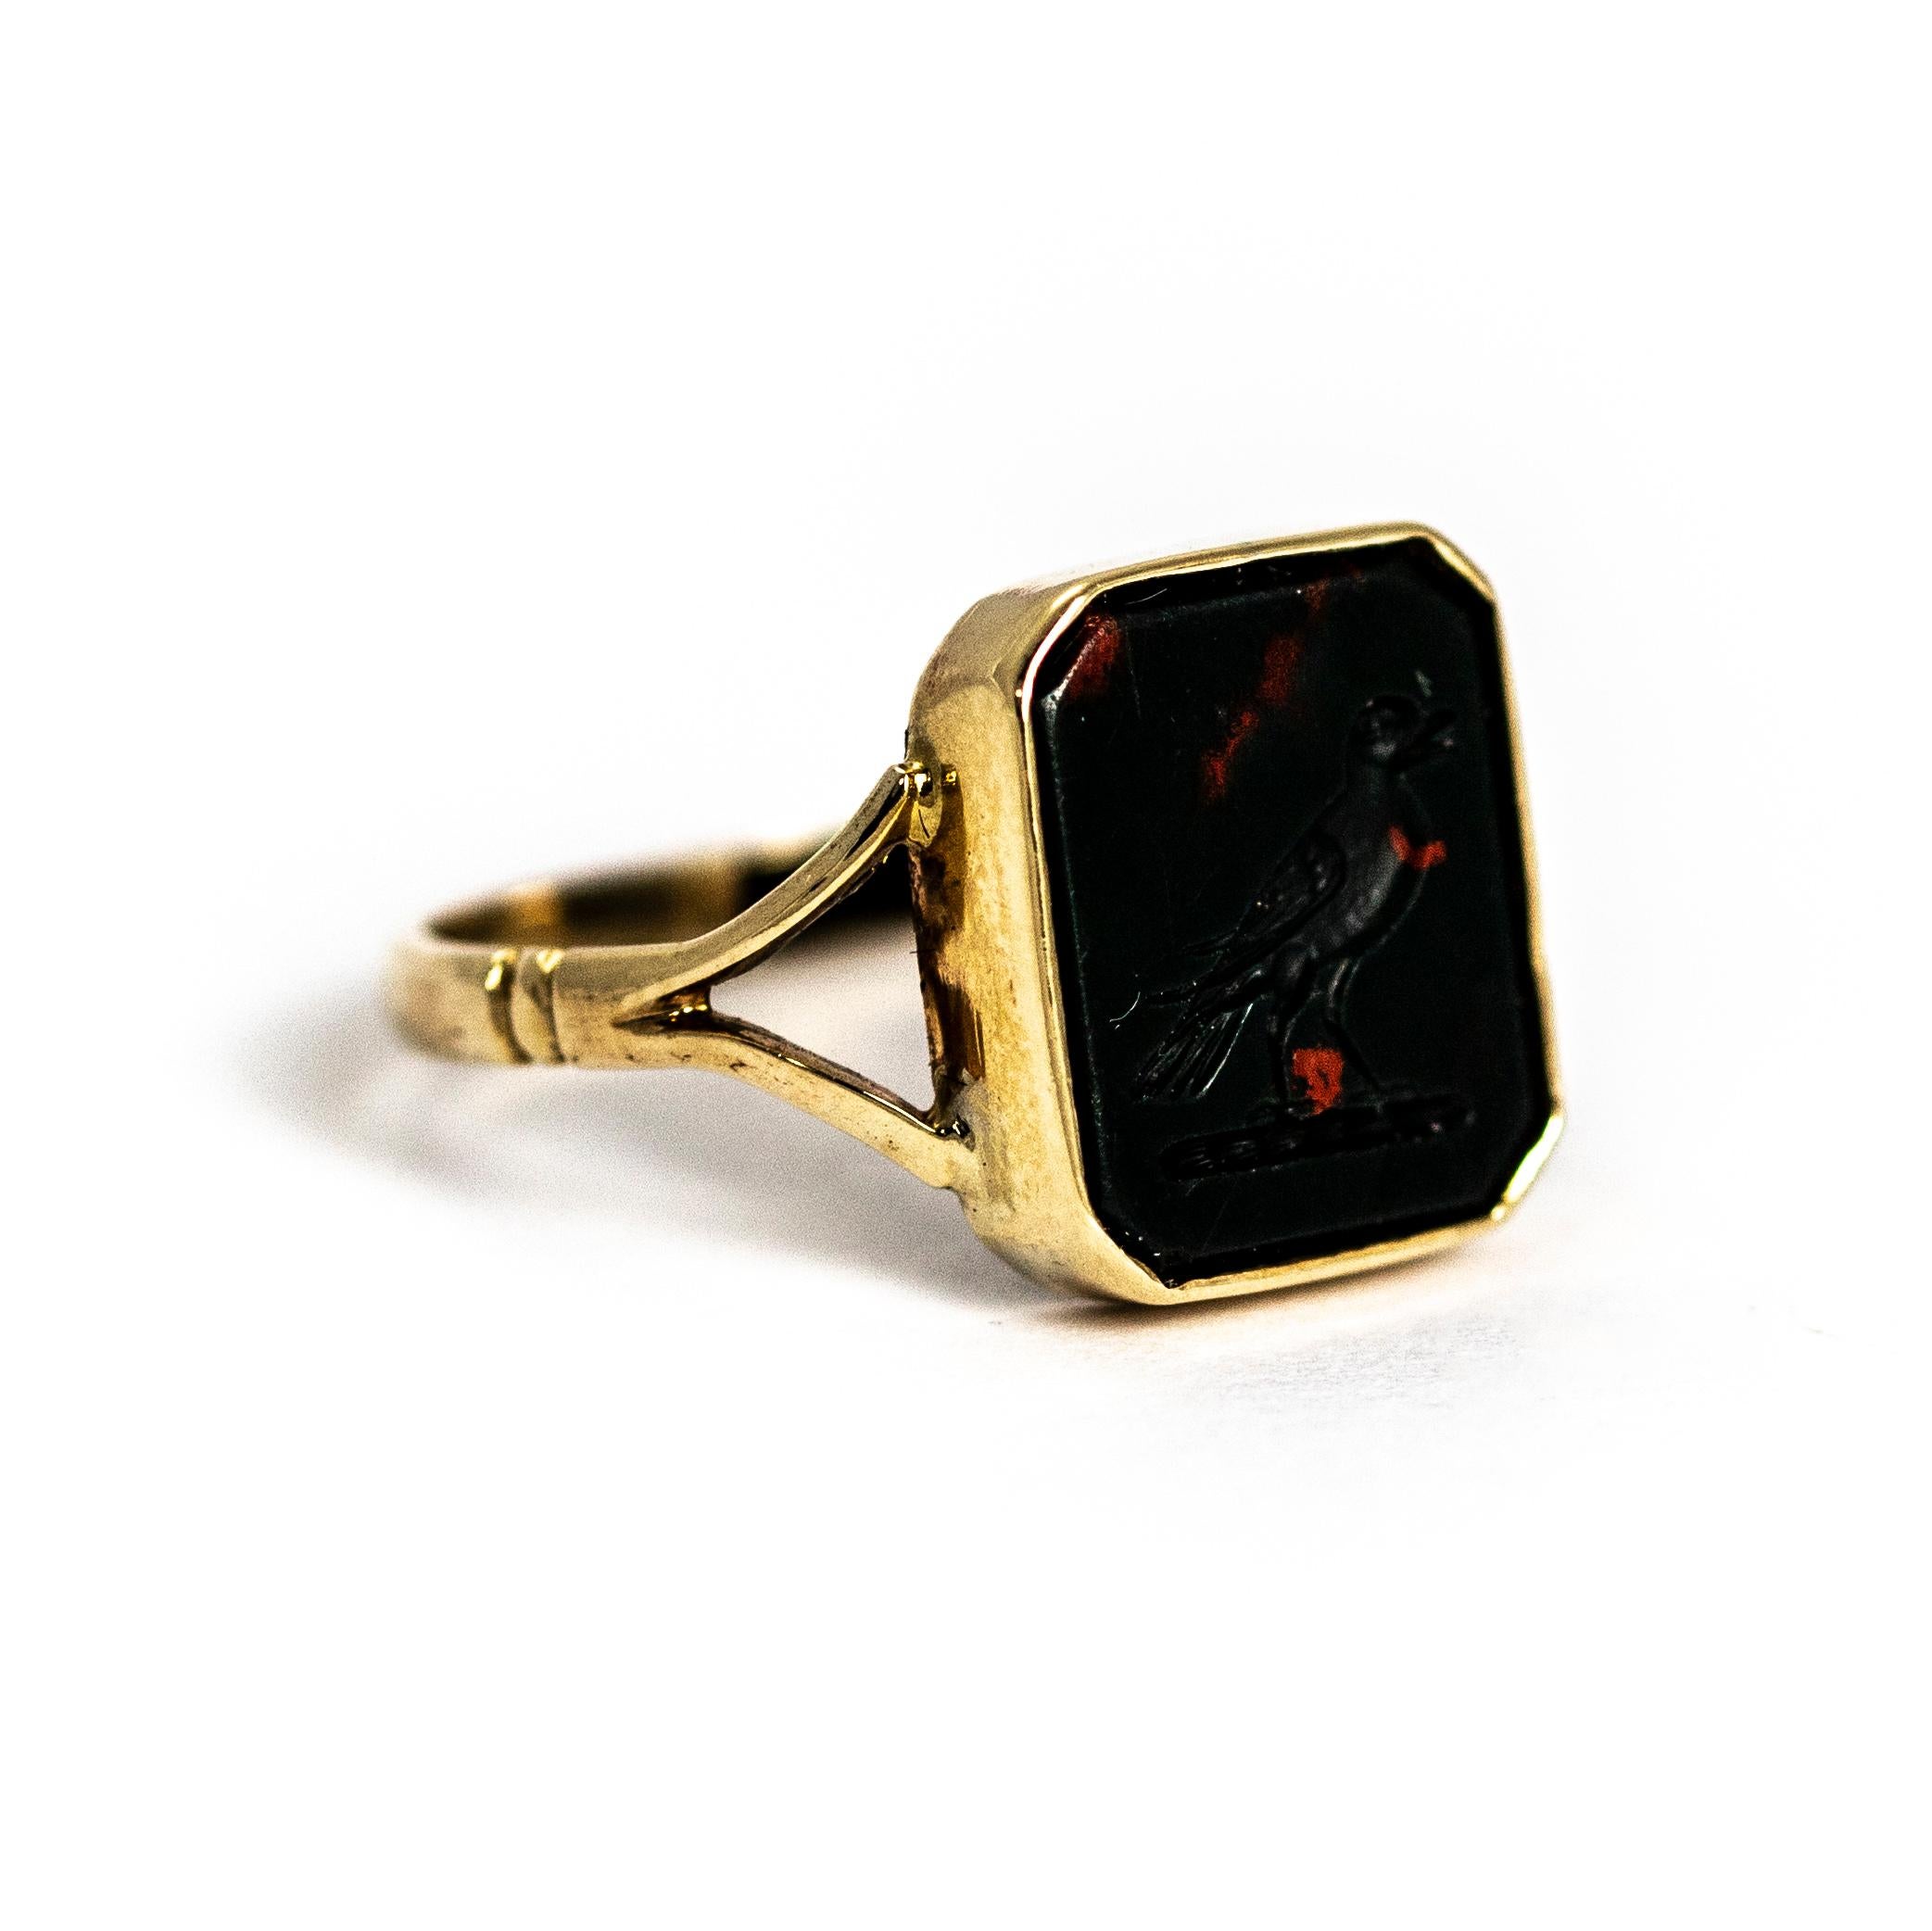 Georgian Mid-19th Century Bloodstone with Bird Engraving and 9 Carat Gold Signet Ring